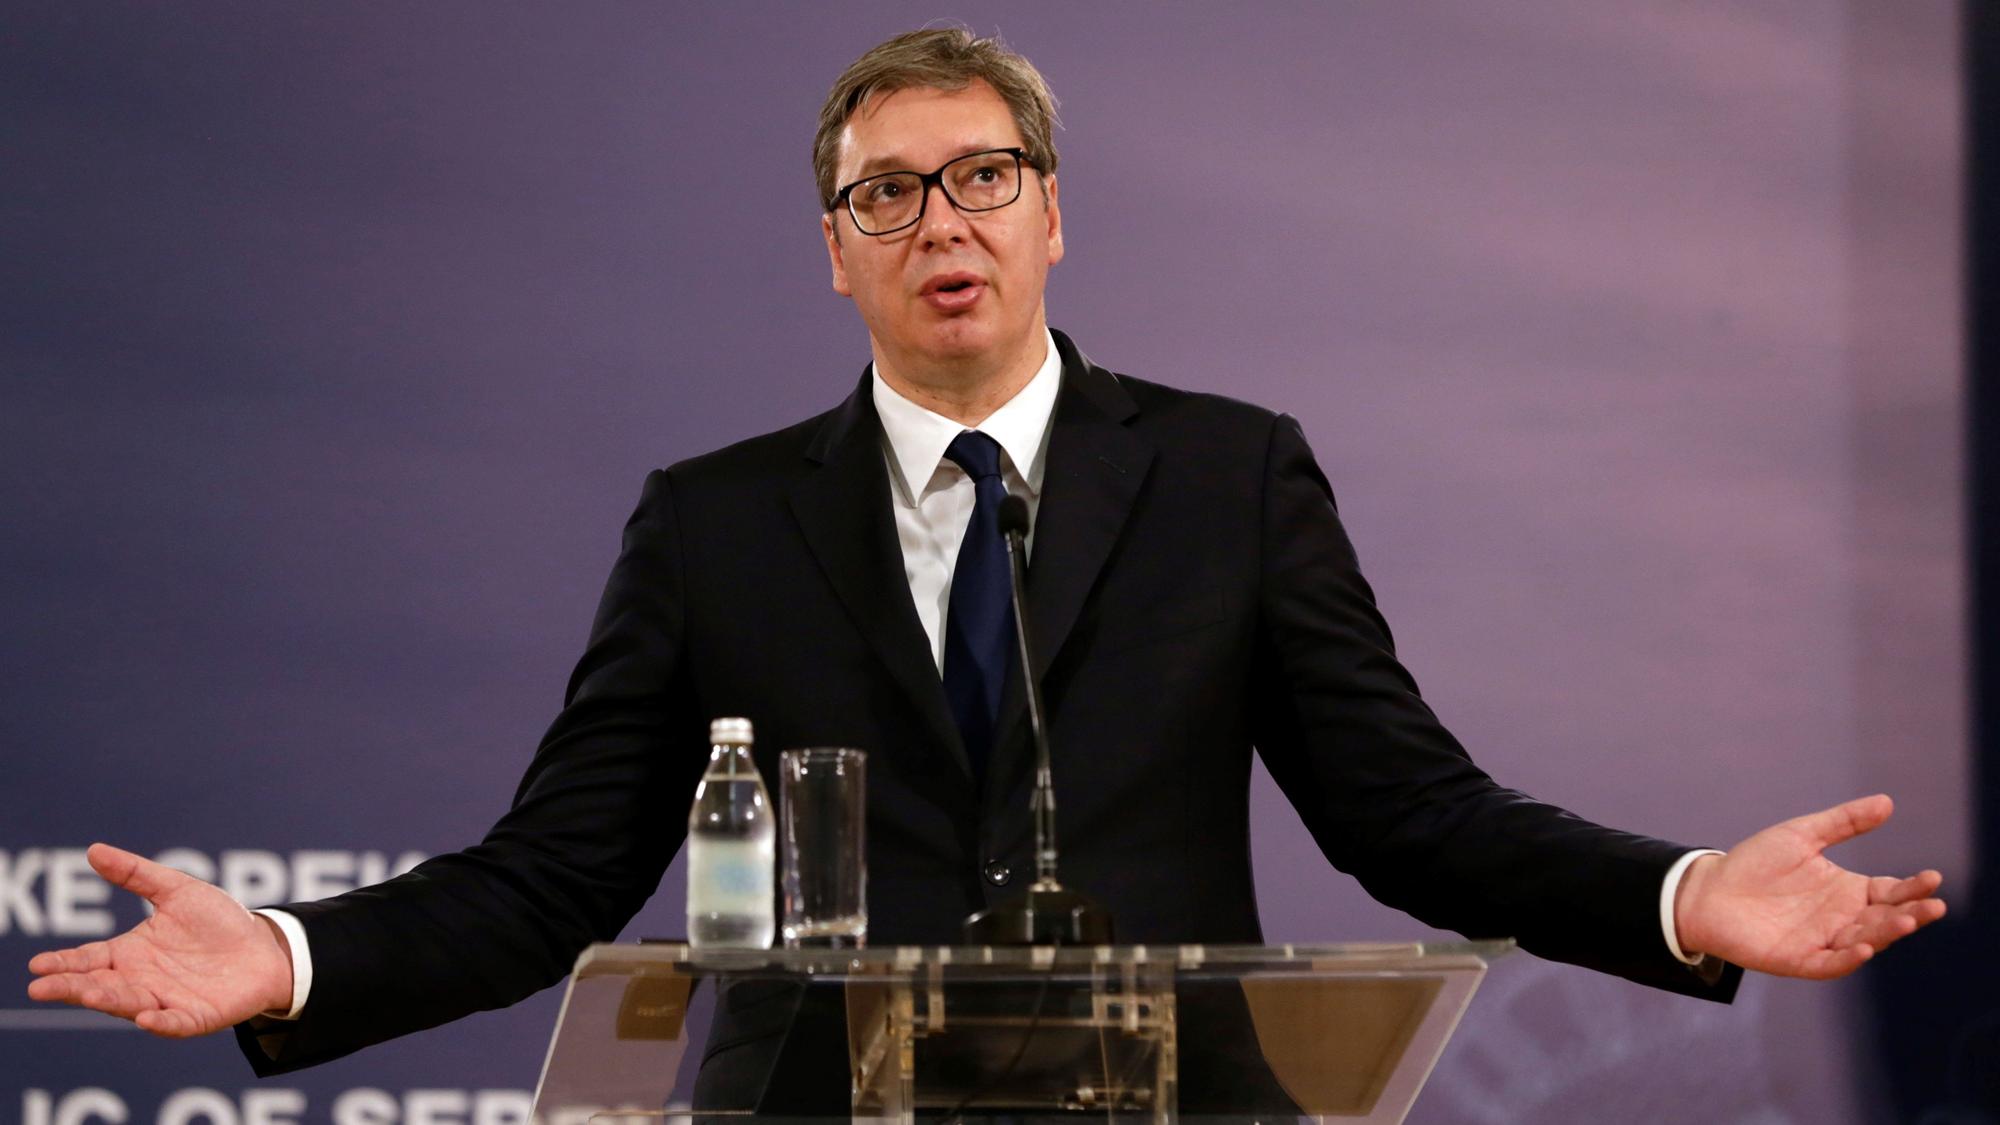 Belgrade (Serbia), 08/07/2021.- Serbian President Aleksandar Vucic talks during a press conference after a meeting with Hungarian Prime Minister Orban in Belgrade, Serbia, 08 July 2021.